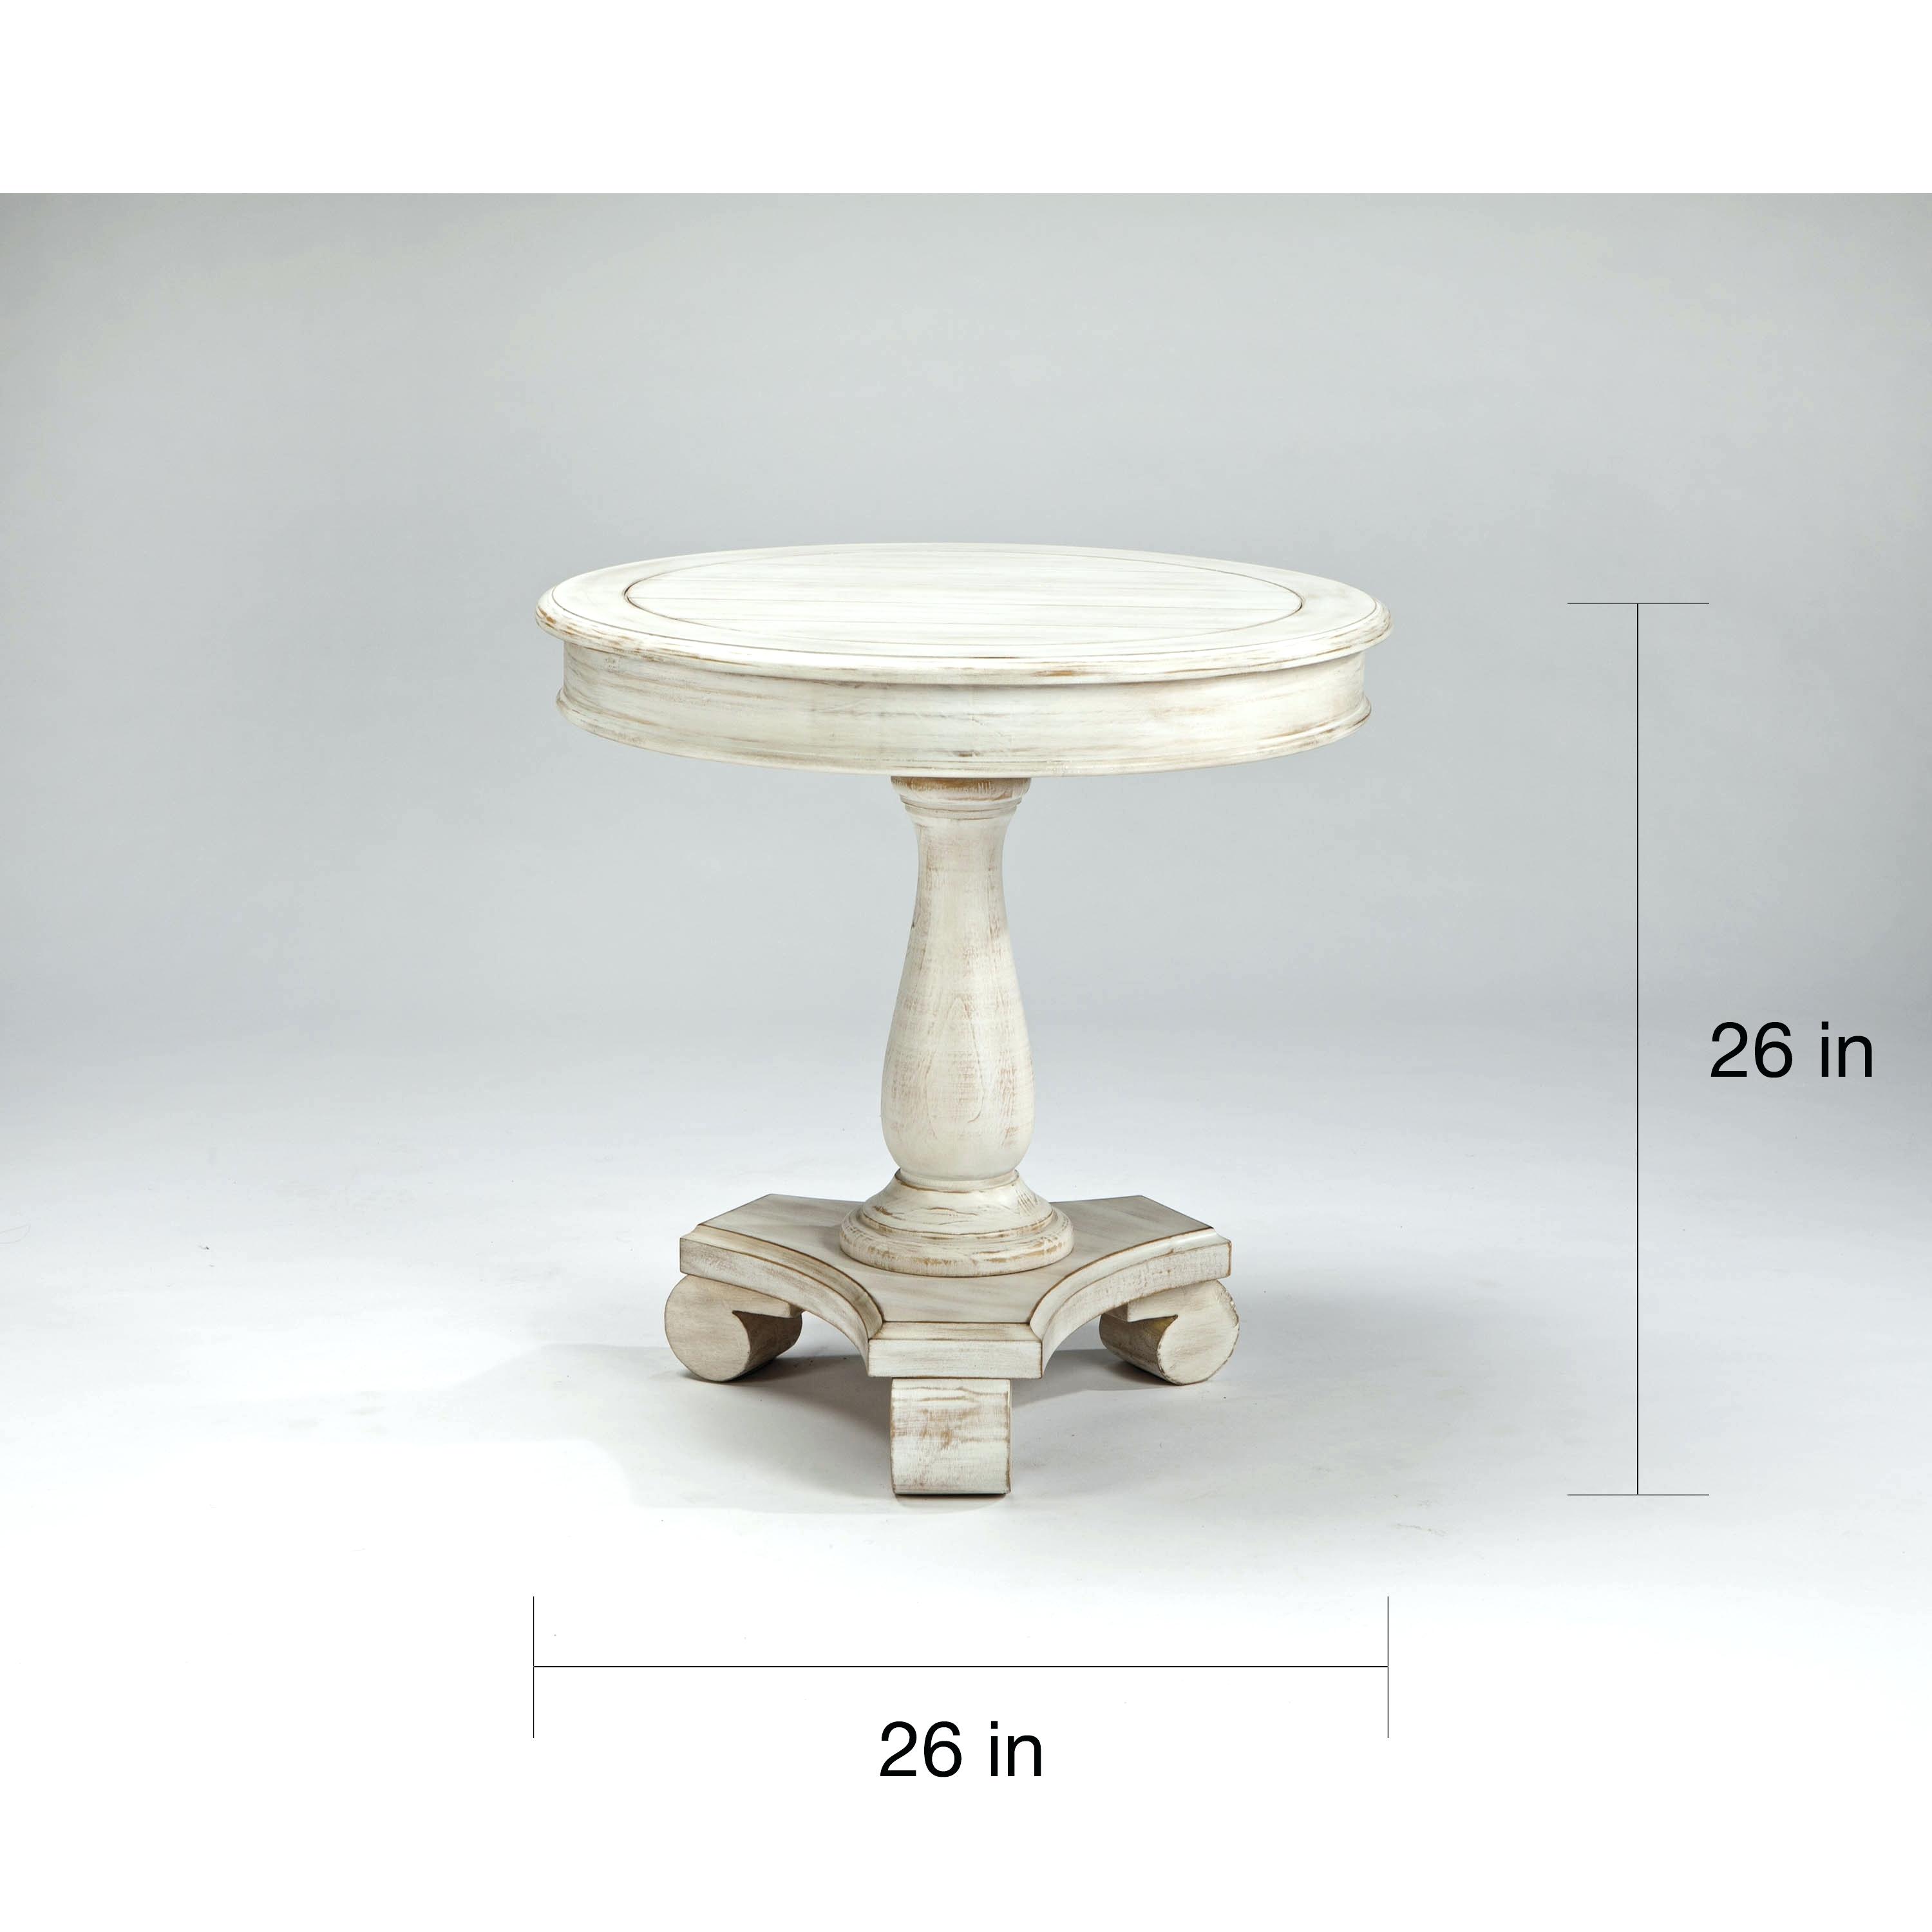 white round accent table ikea tables pedestal template whitewash small living room marble affordable nightstands inch vinyl tablecloth adjustable desk ouroboros mouse red